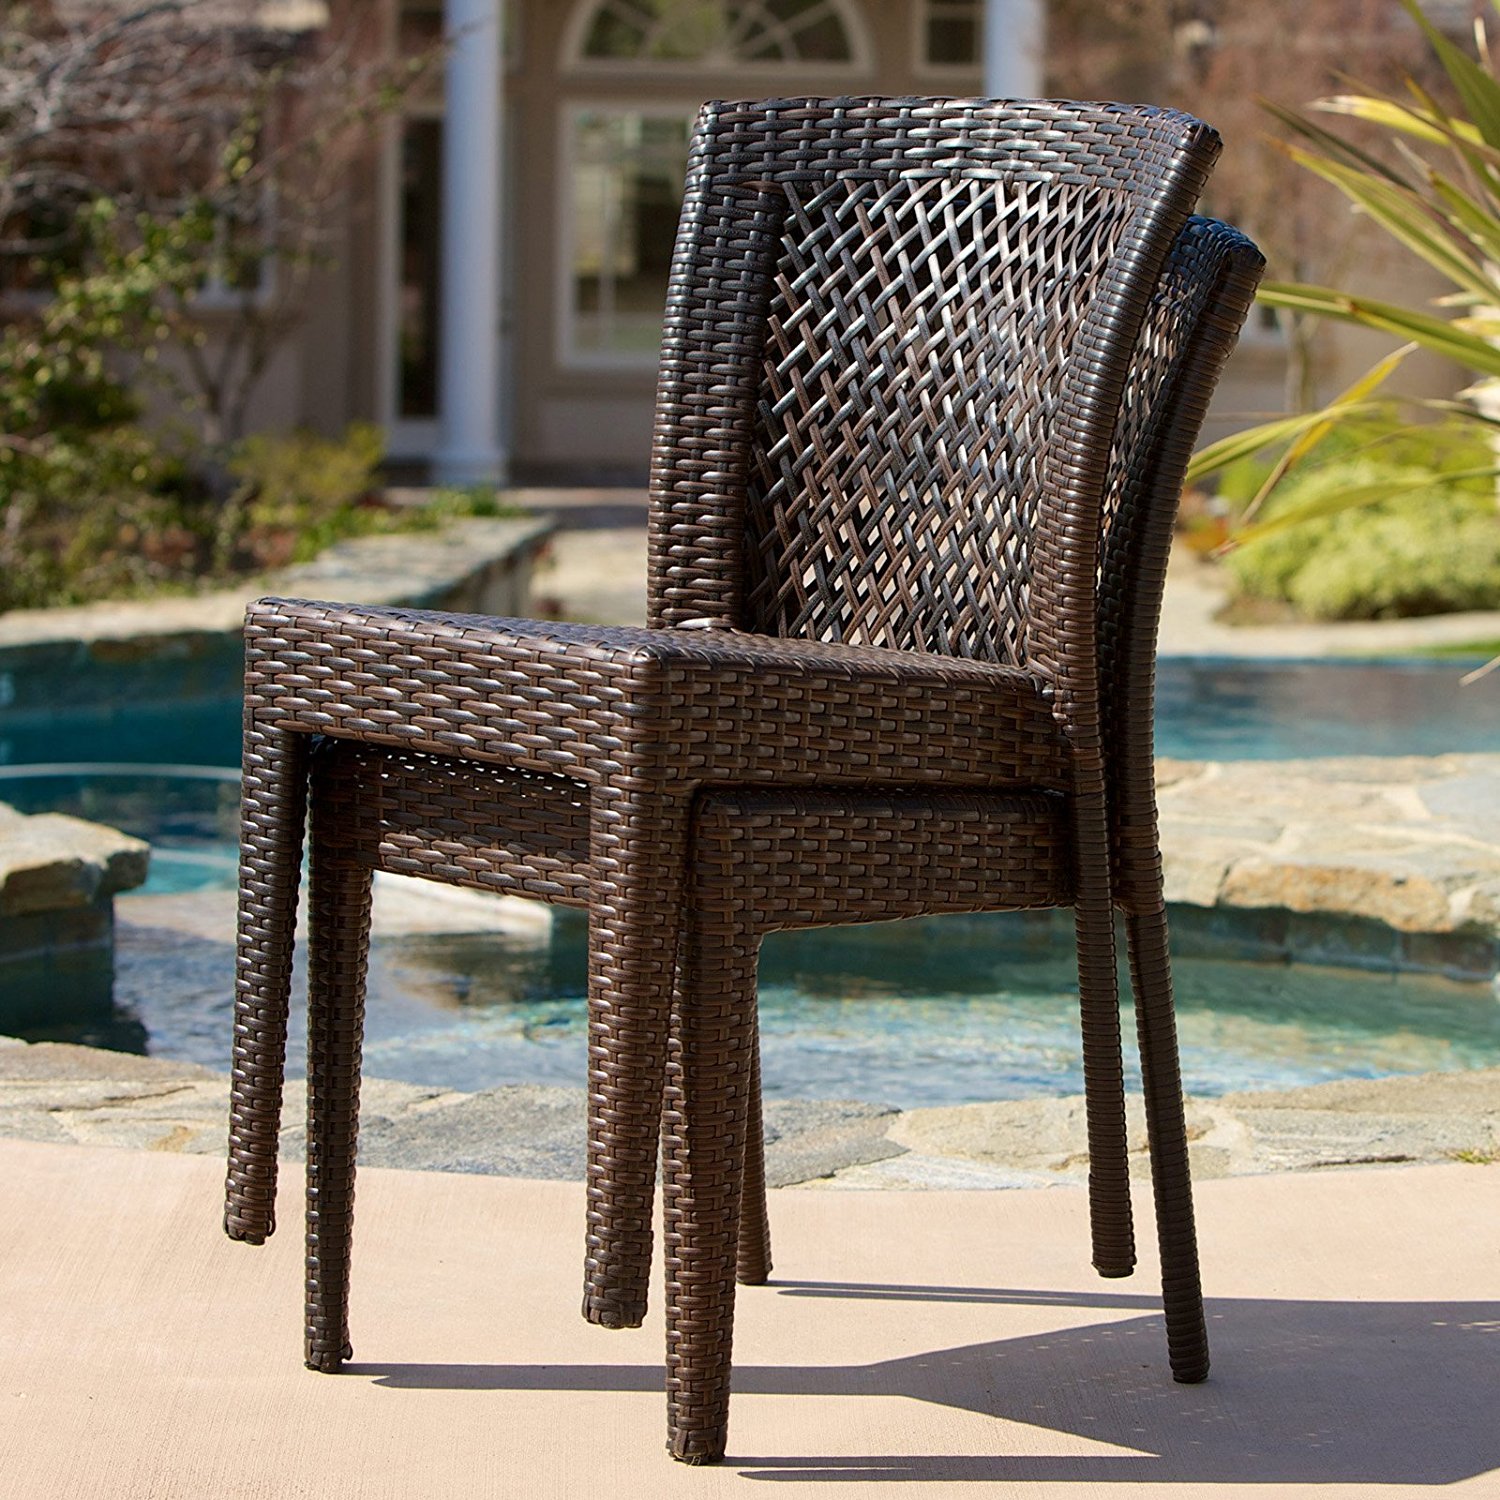 amazon.com : best selling dawn outdoor wicker chairs, set of 2 : patio UOJMCZE